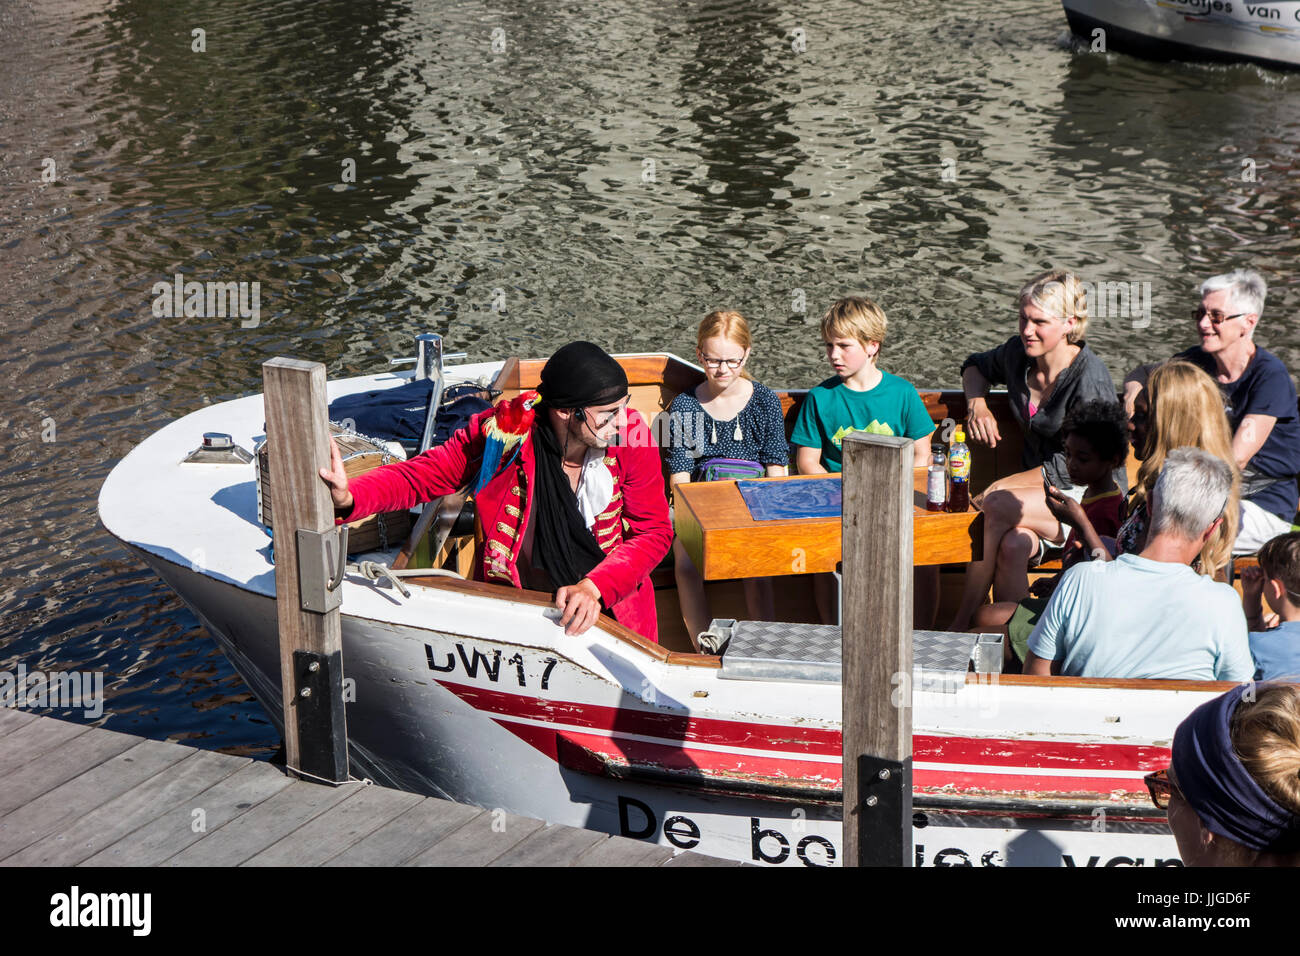 City guide dressed as pirate in boat on the river Leie / Lys guiding tourists during sightseeing trip in the town center of Ghent, Flanders, Belgium Stock Photo